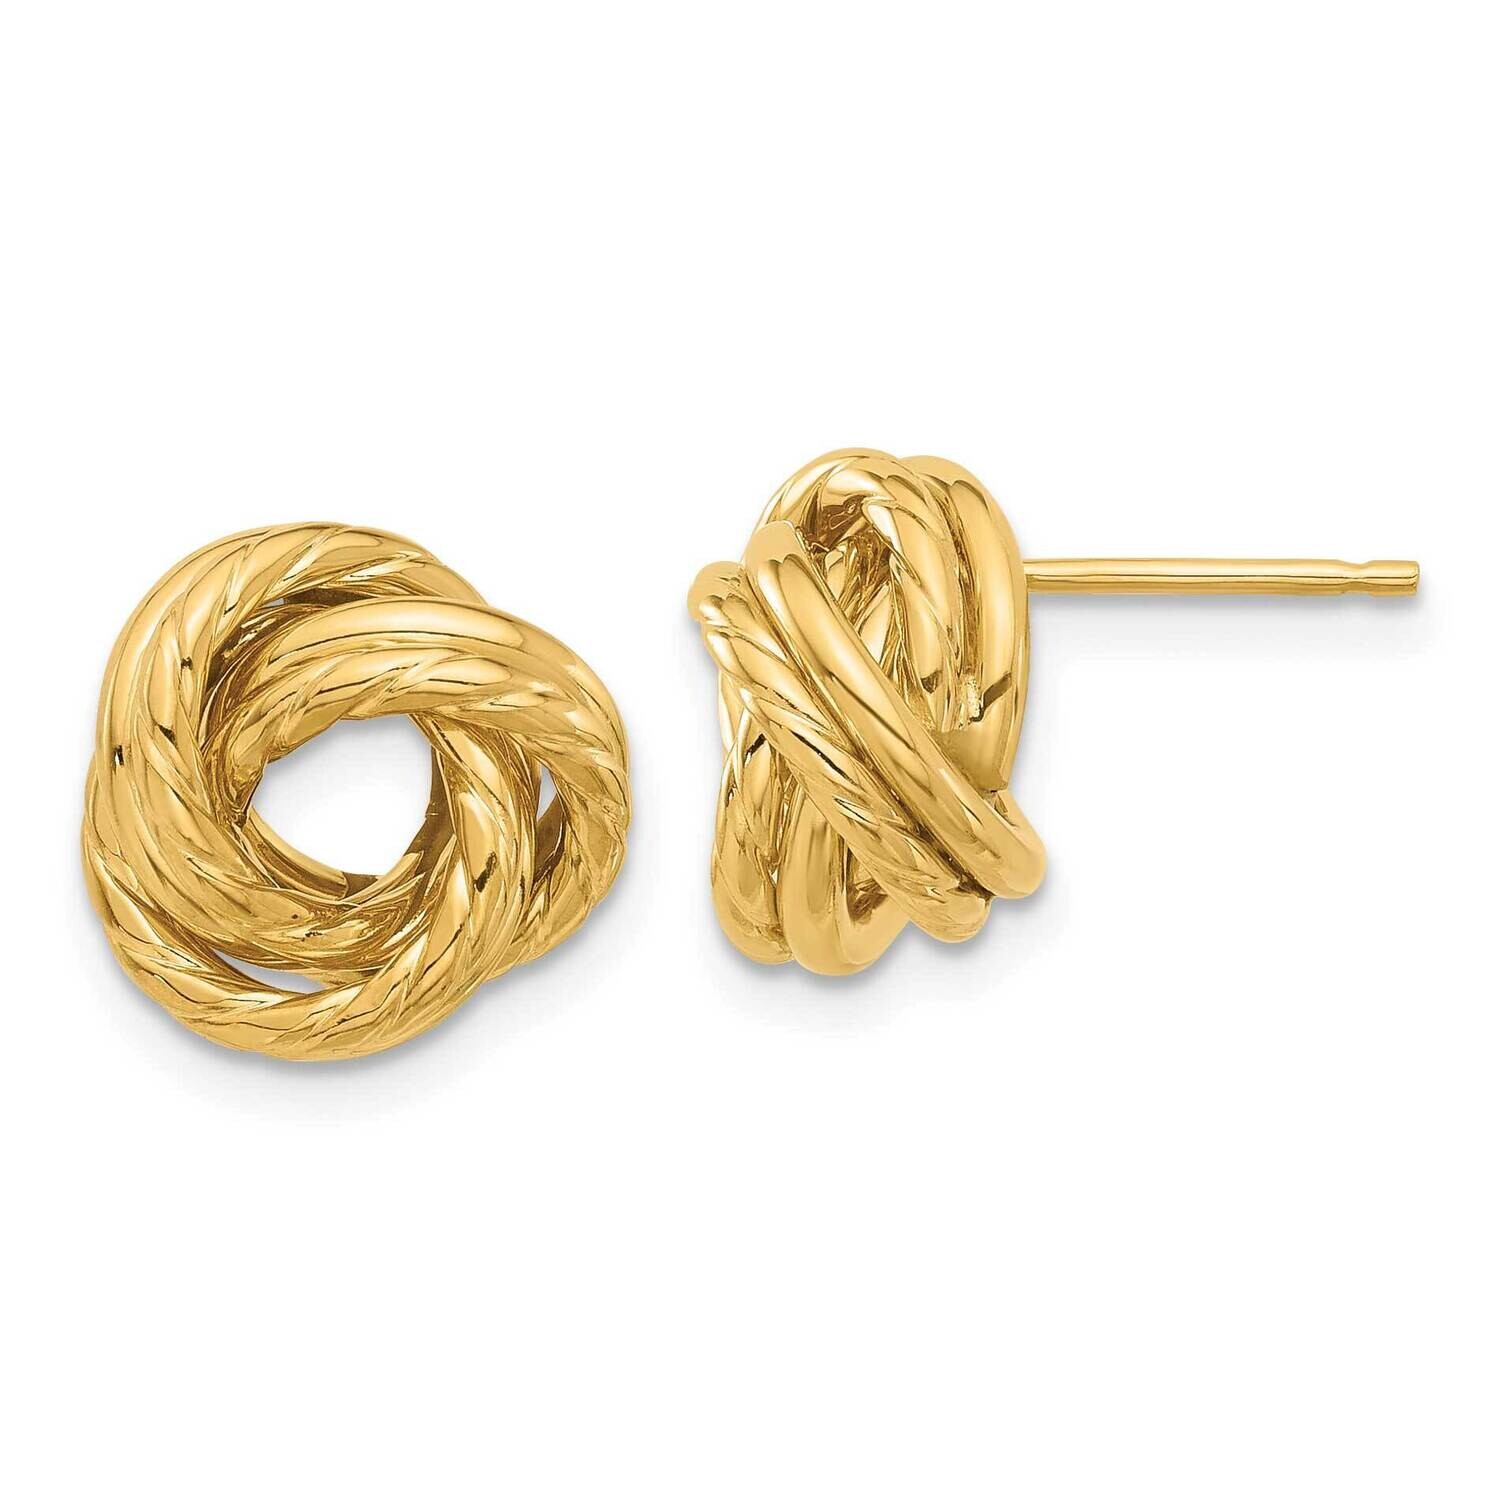 Textured Love Knot Post Earrings 14k Polished Gold TF2345